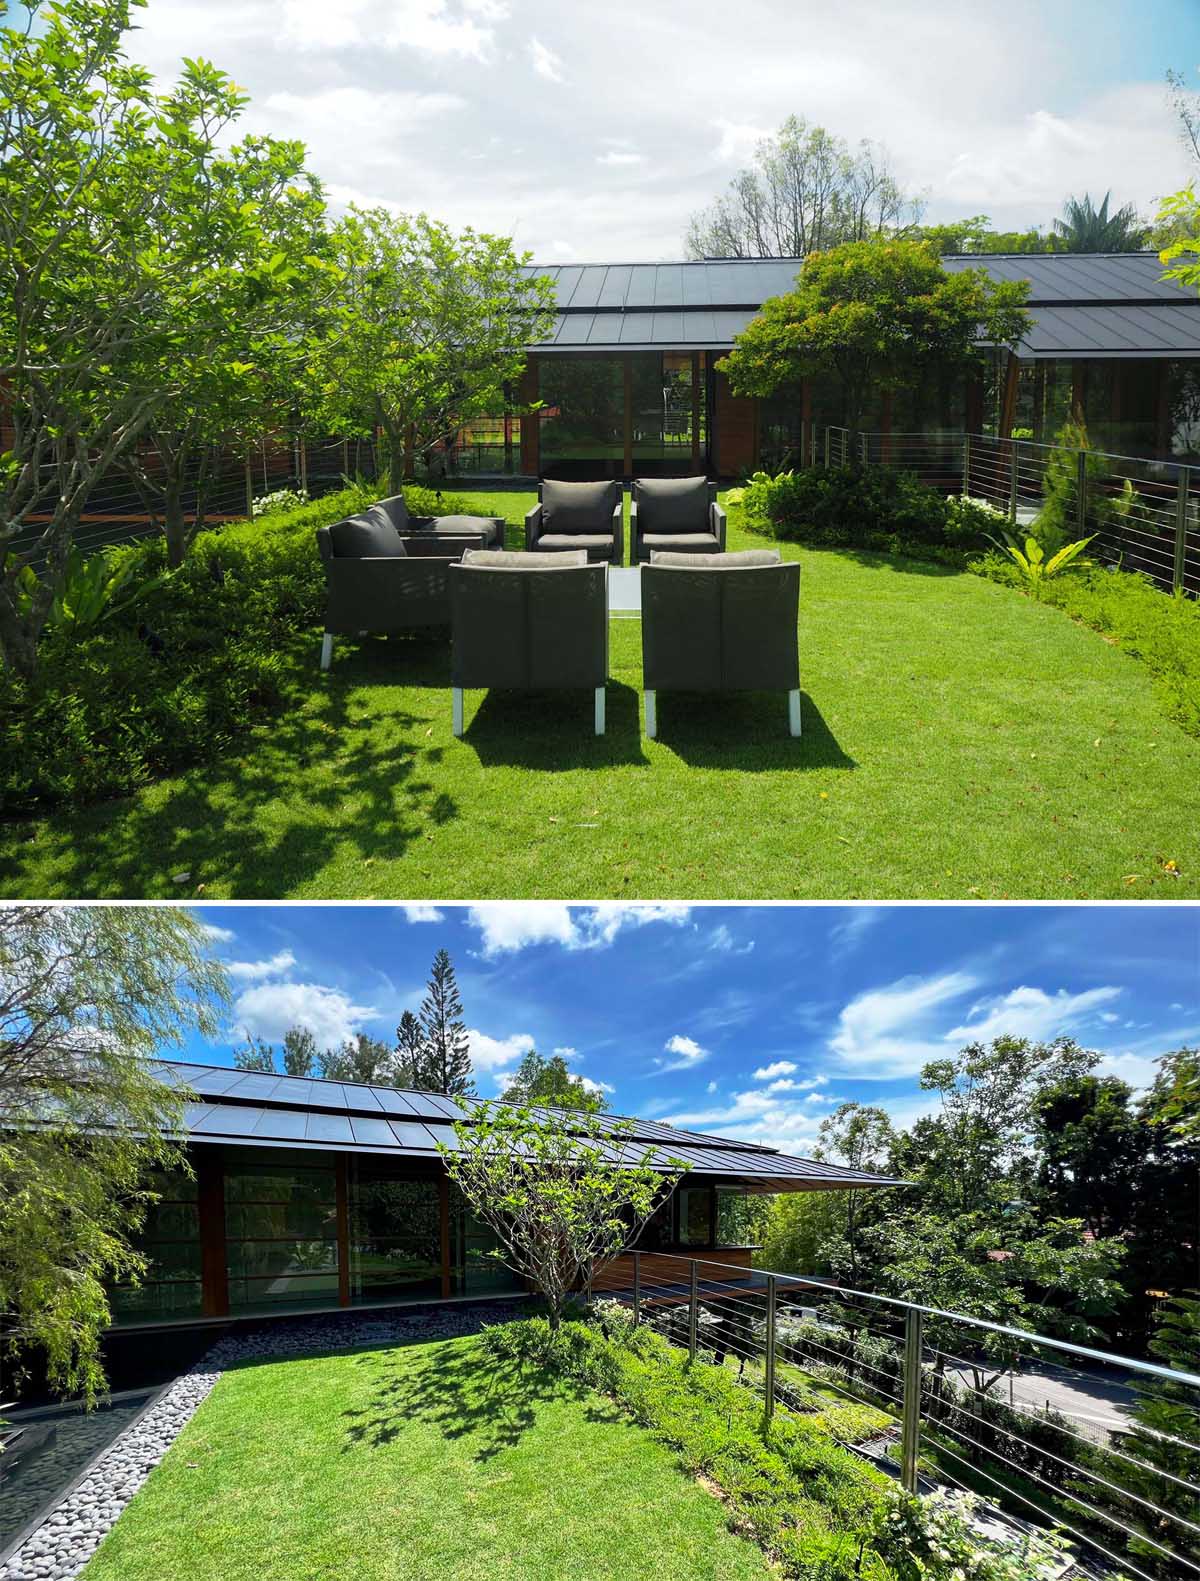 A modern house includes a roof garden with small shrubs, trees, lawn, and a seating area.